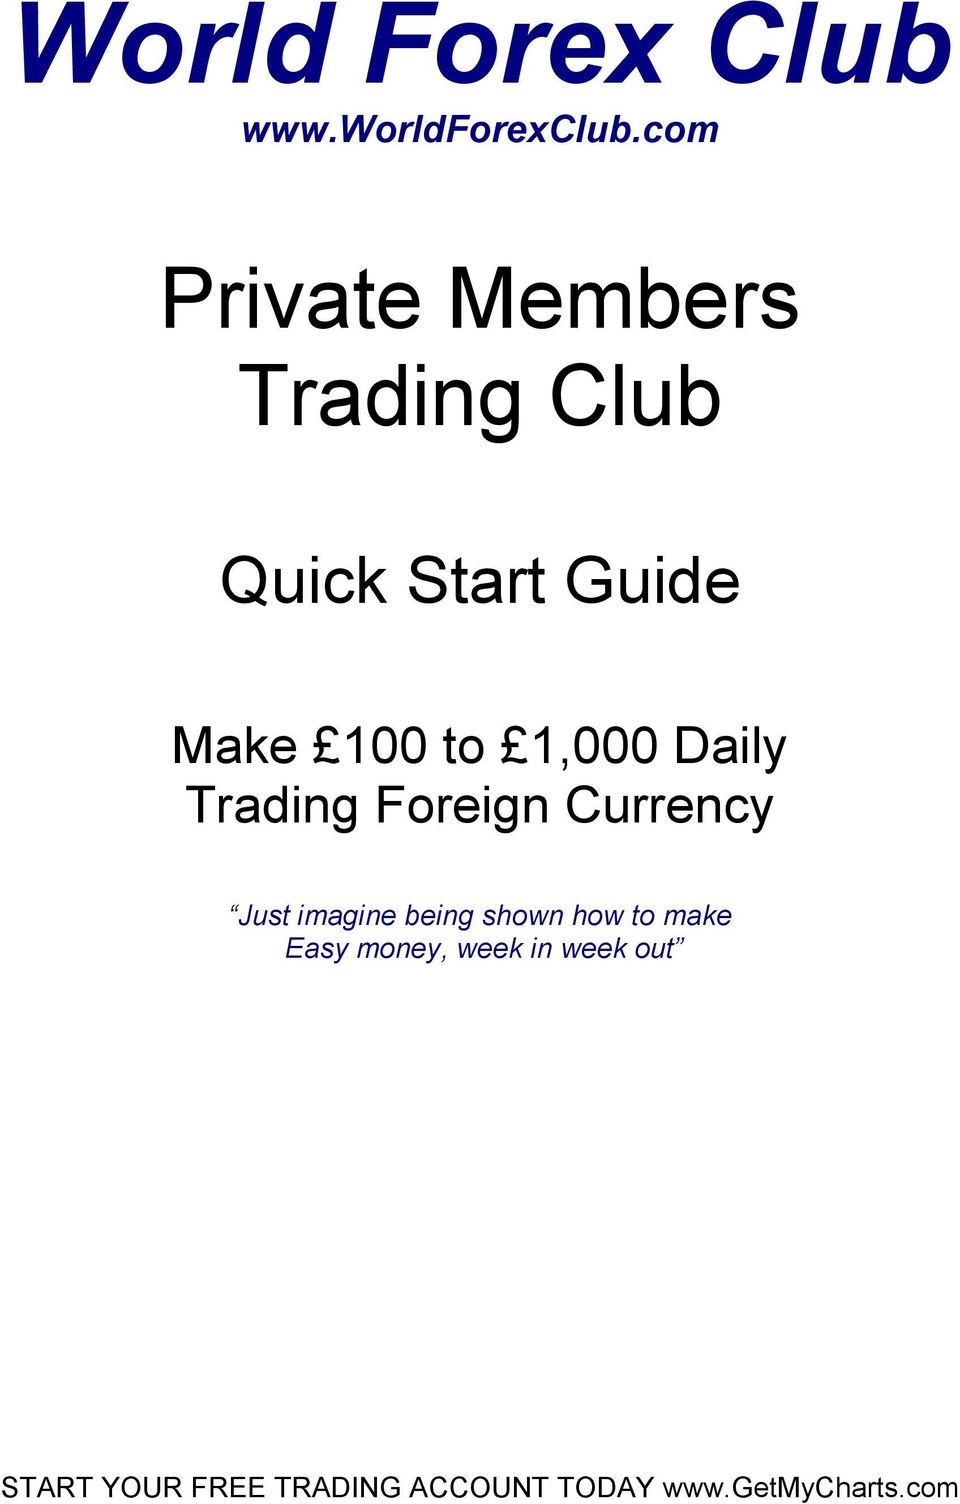 World forex club how to enable forex